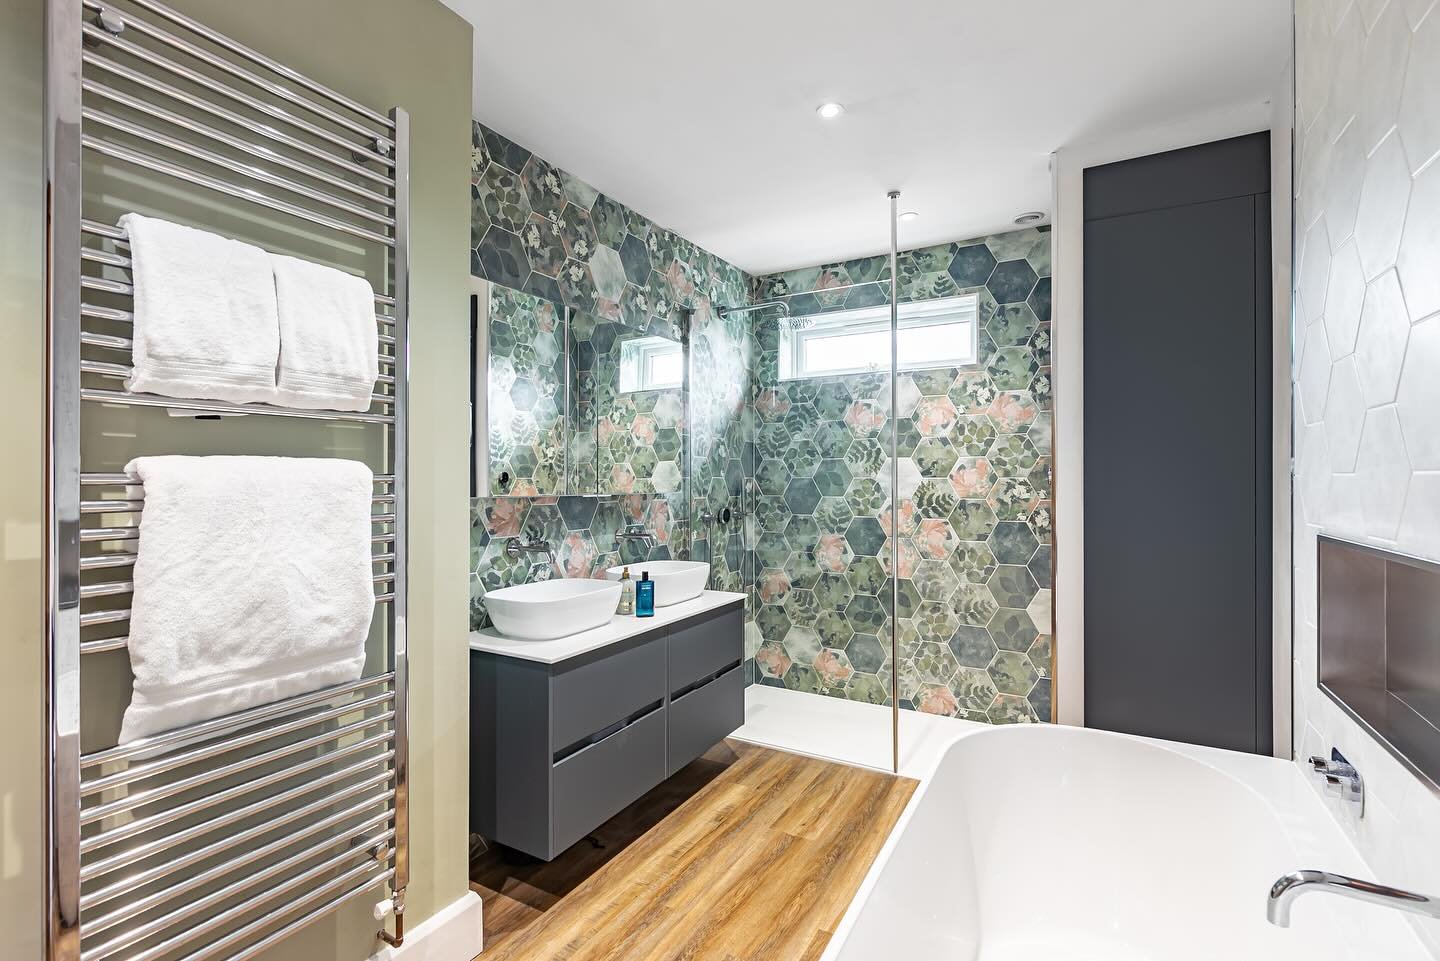 Another beautiful bathroom designed, supplied and installed by the team at Dajon. 

This bathroom features a double bowl floating vanity unit, large walk in shower and a semi freestanding bath. The tiles are from the national trust collection by @cap